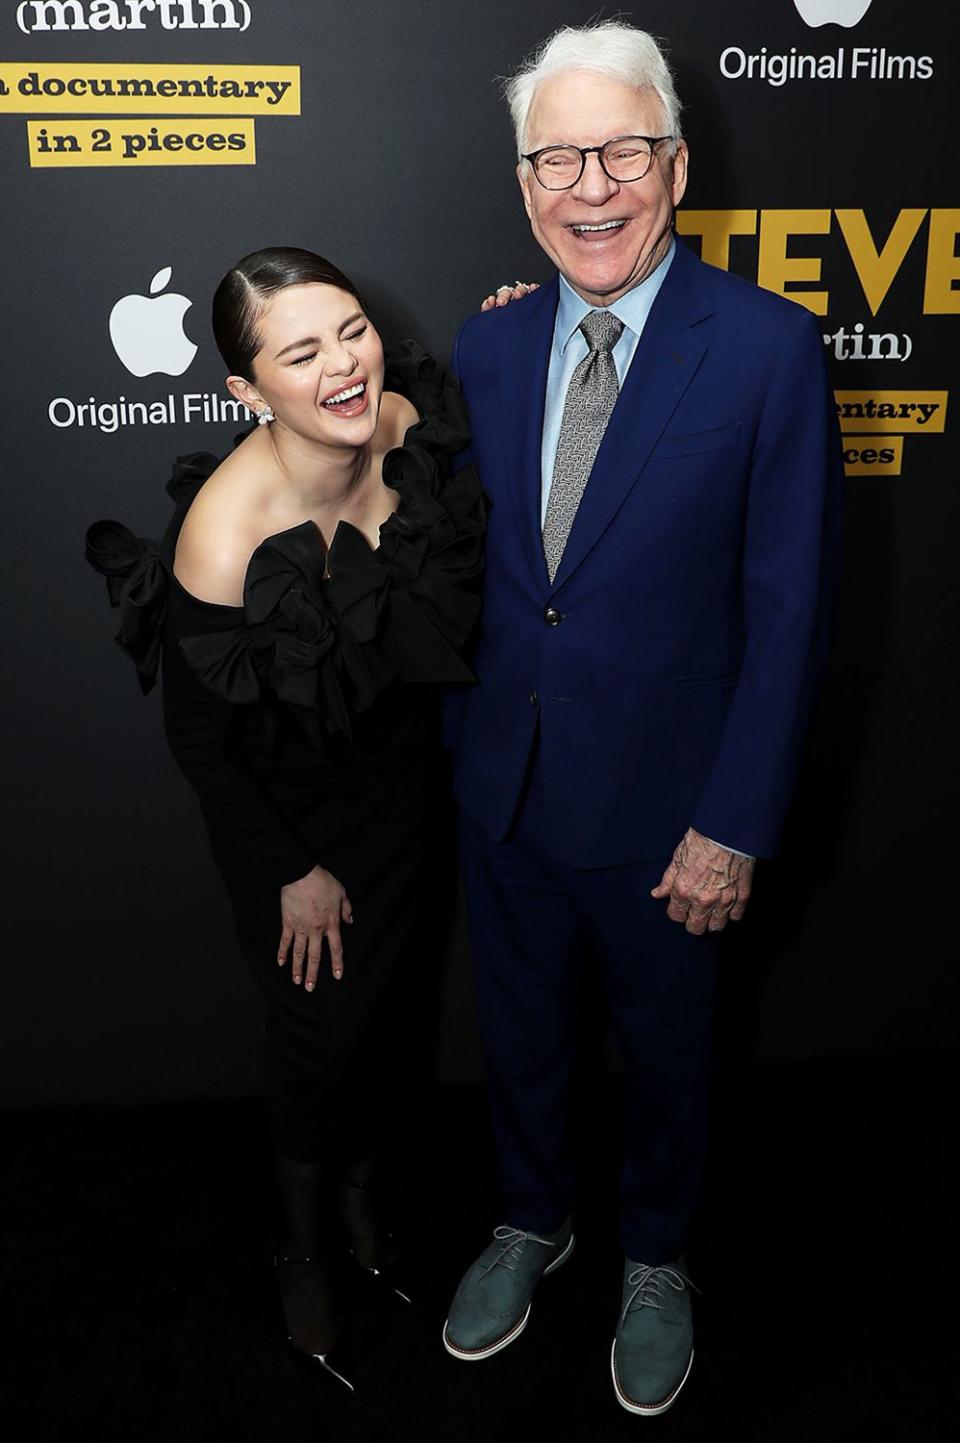 <p>Marion Curtis/StarPix for Apple TV+/INSTARimages</p> Selena Gomez (left) and Steve Martin at the premiere of his documentary in NYC